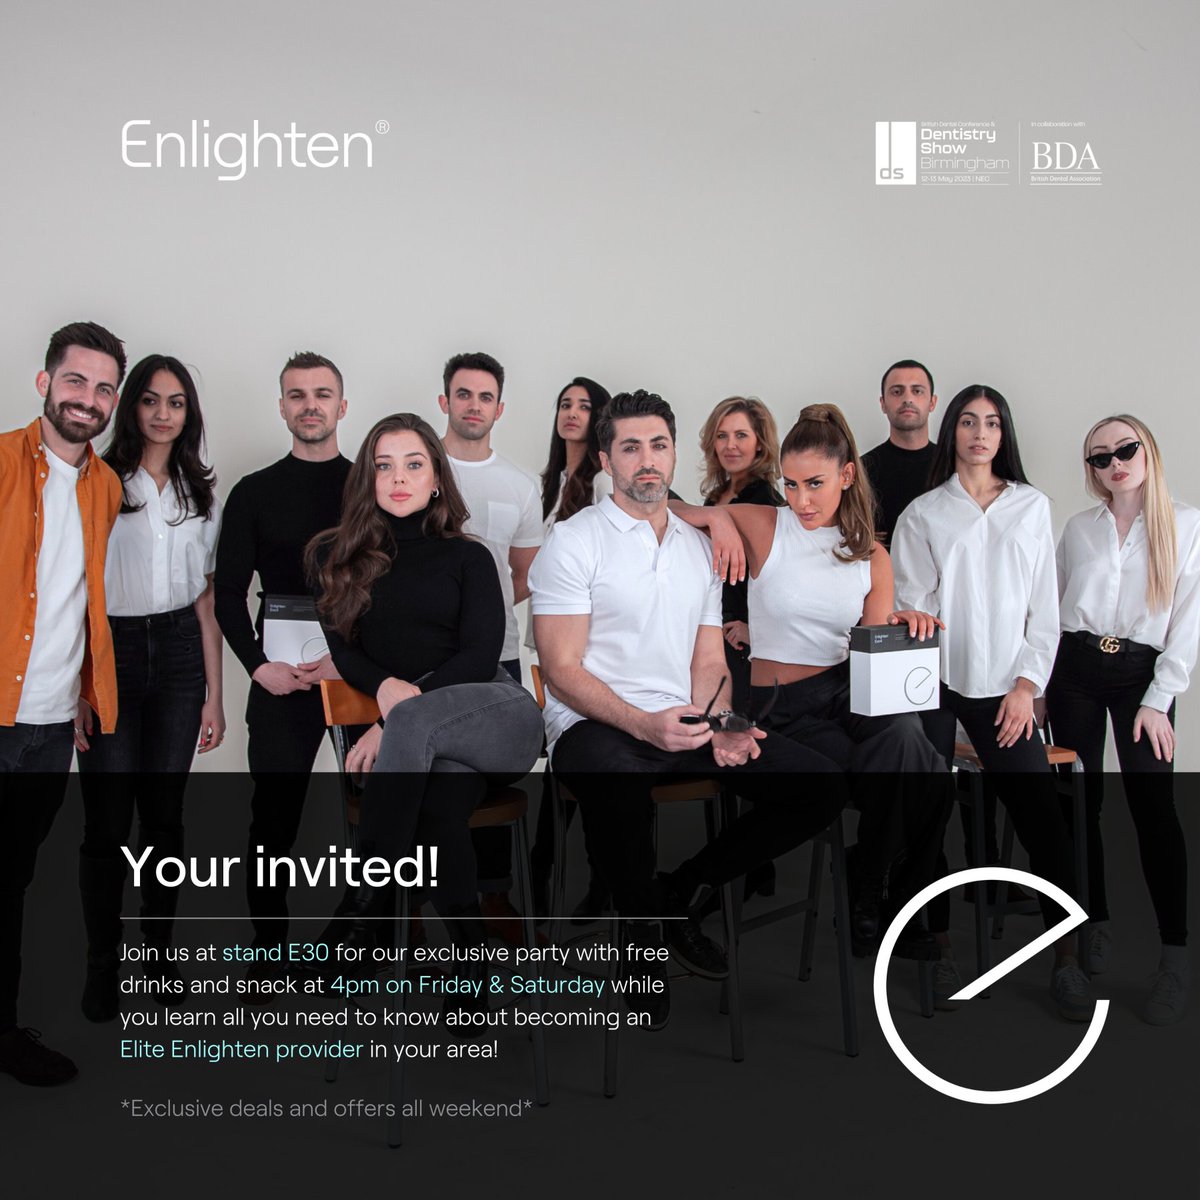 Ready to elevate your practice? Join Enlighten at the NEC Dentistry Show for 2 days of innovation & education! Don't miss Enlighten's parties at stand E30 Friday and Saturday at 4pm, where they will showcase the exclusive benefits of being your area's top Enlighten provider! #ad